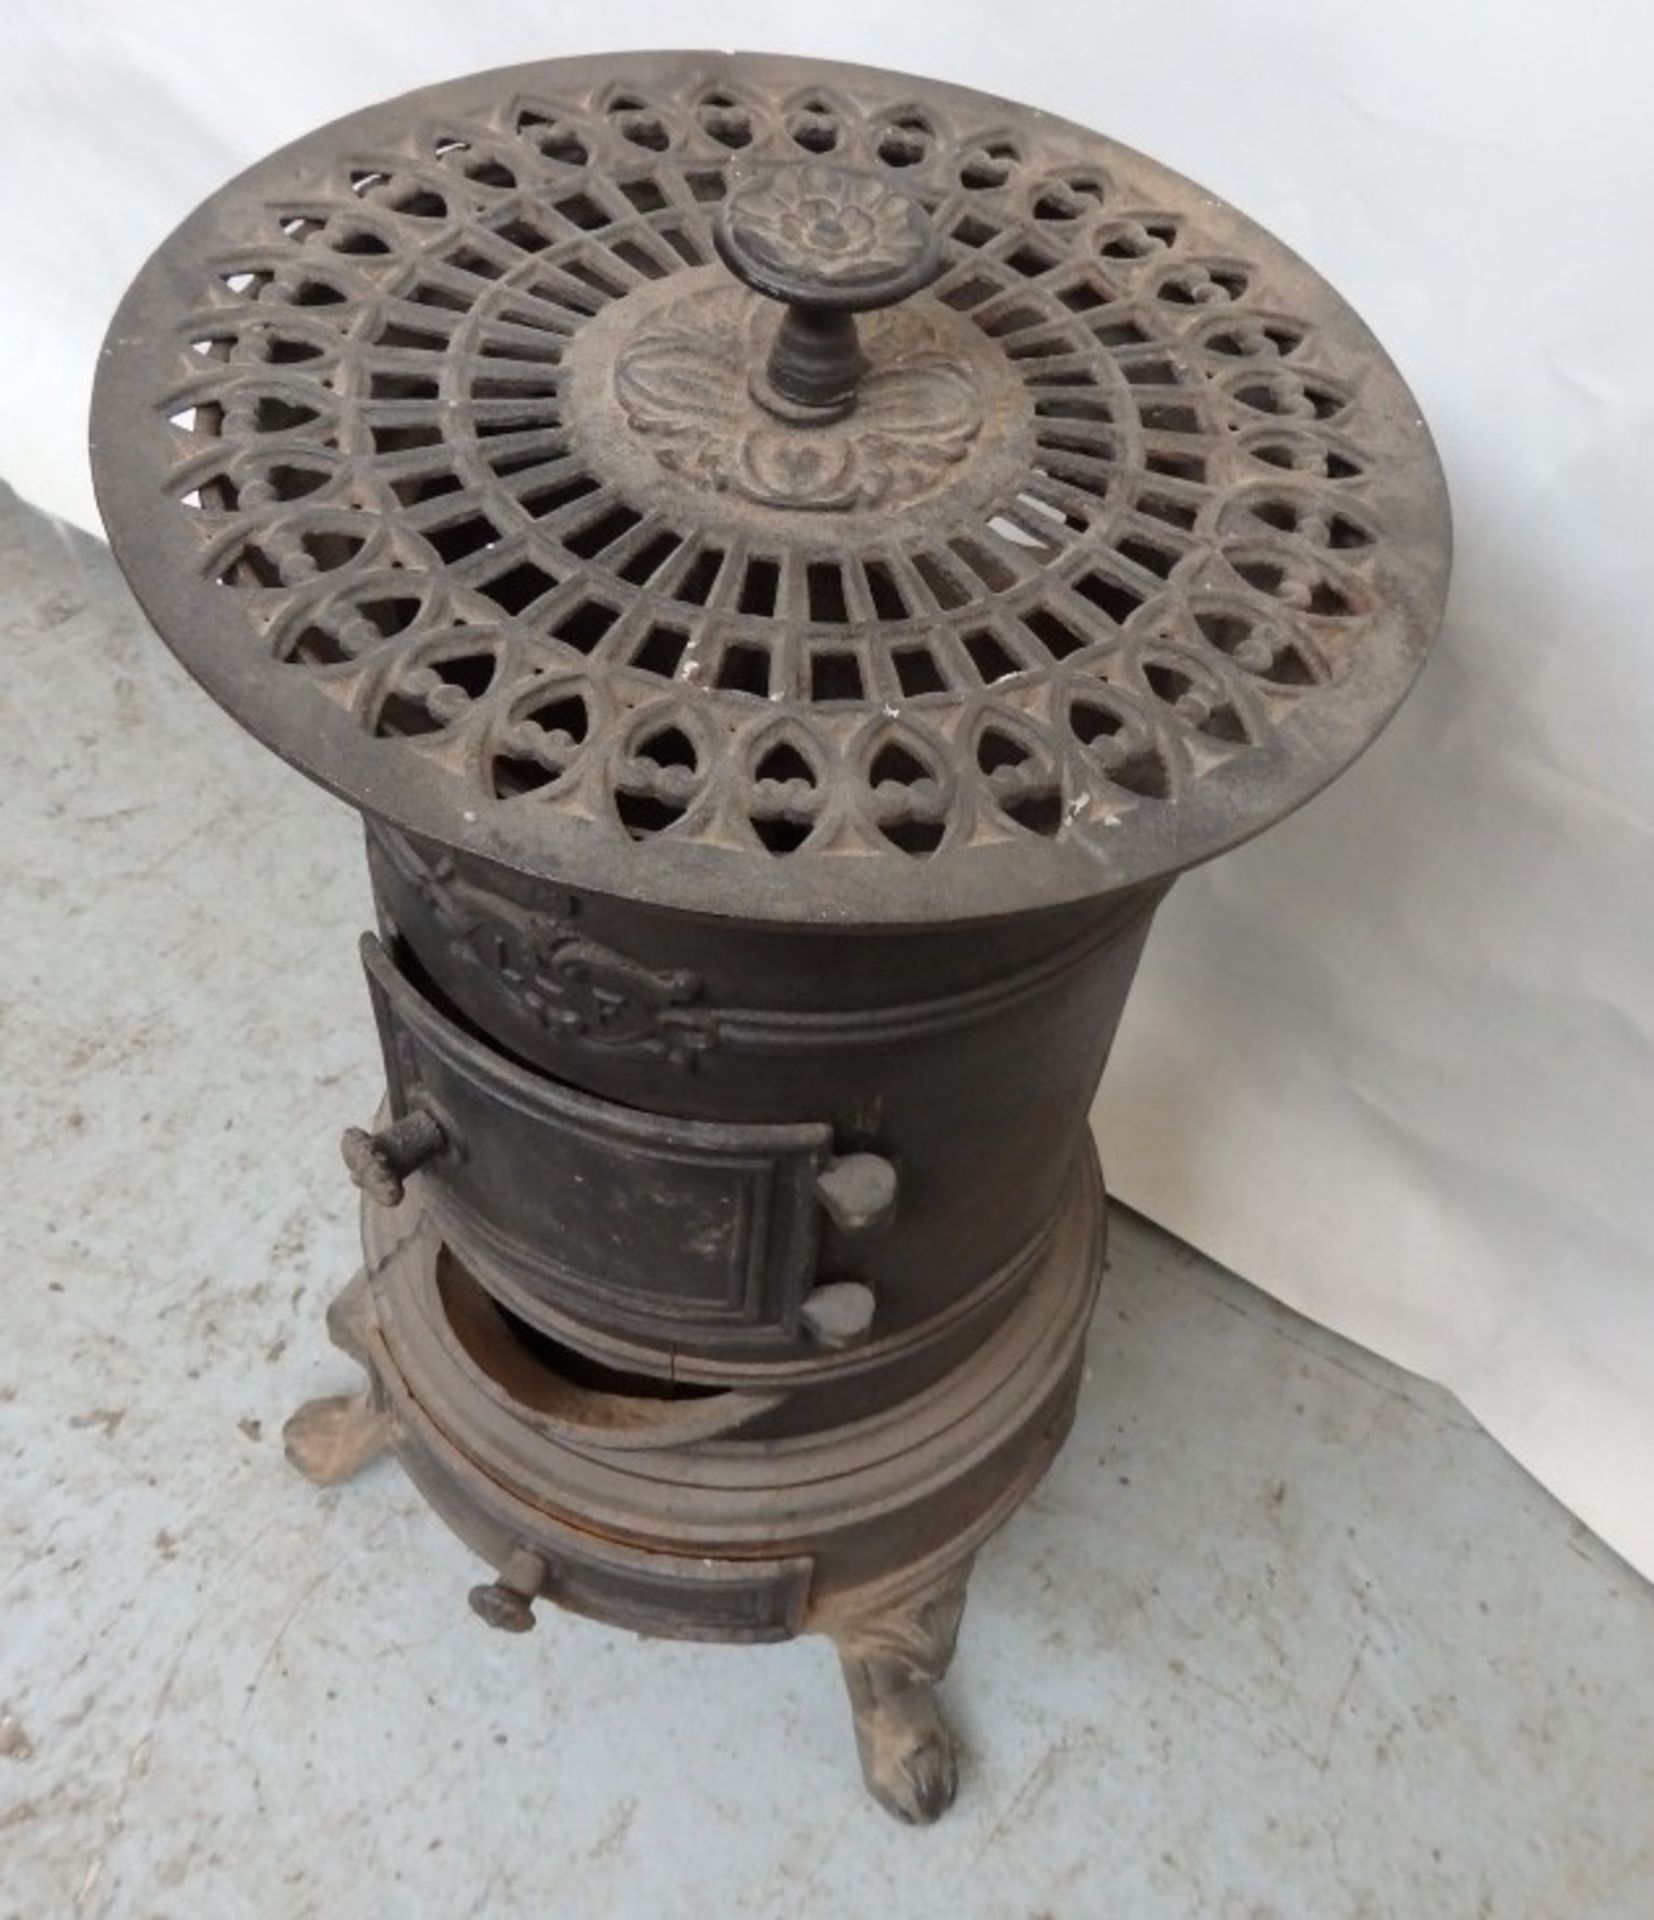 1 x Reclaimed Antique Cast Iron Potbelly Wood Burner / Stove - Dimensions: H61, Diameter 30cm - - Image 5 of 9